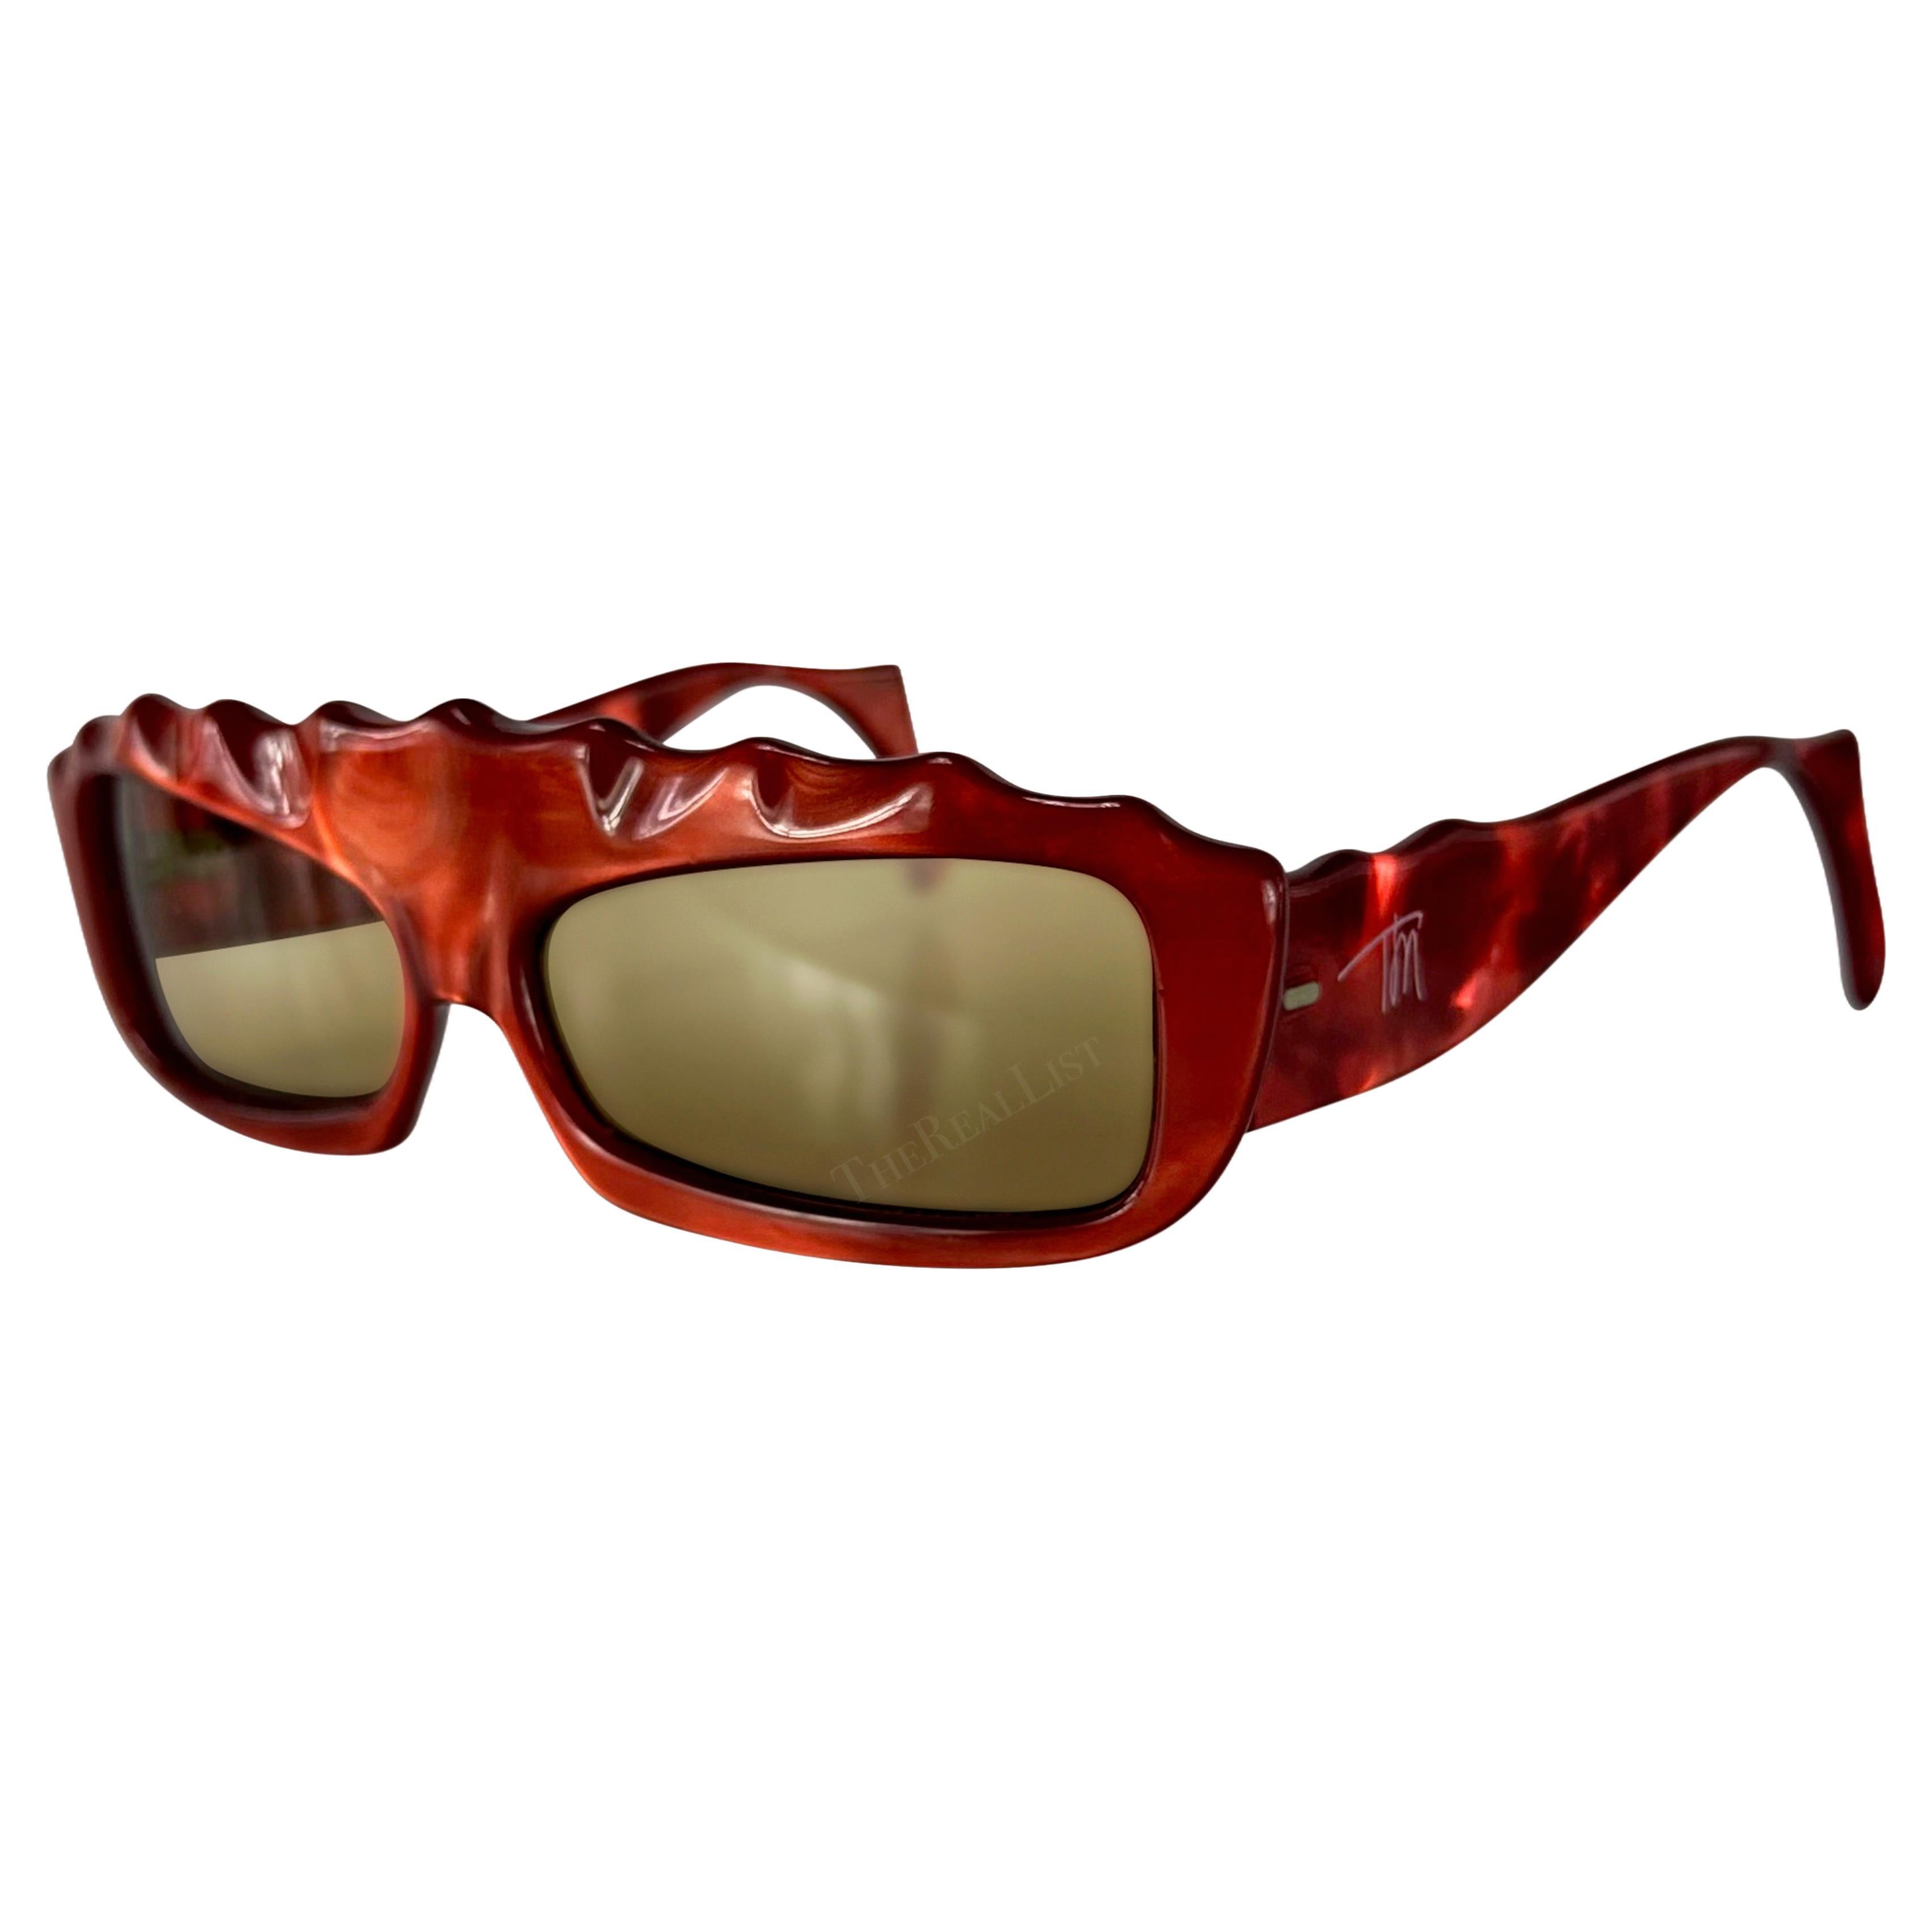 S/S 1979 Thierry Mugler Red Opalescent Red Sculpted Rectangular Sunglasses For Sale 3